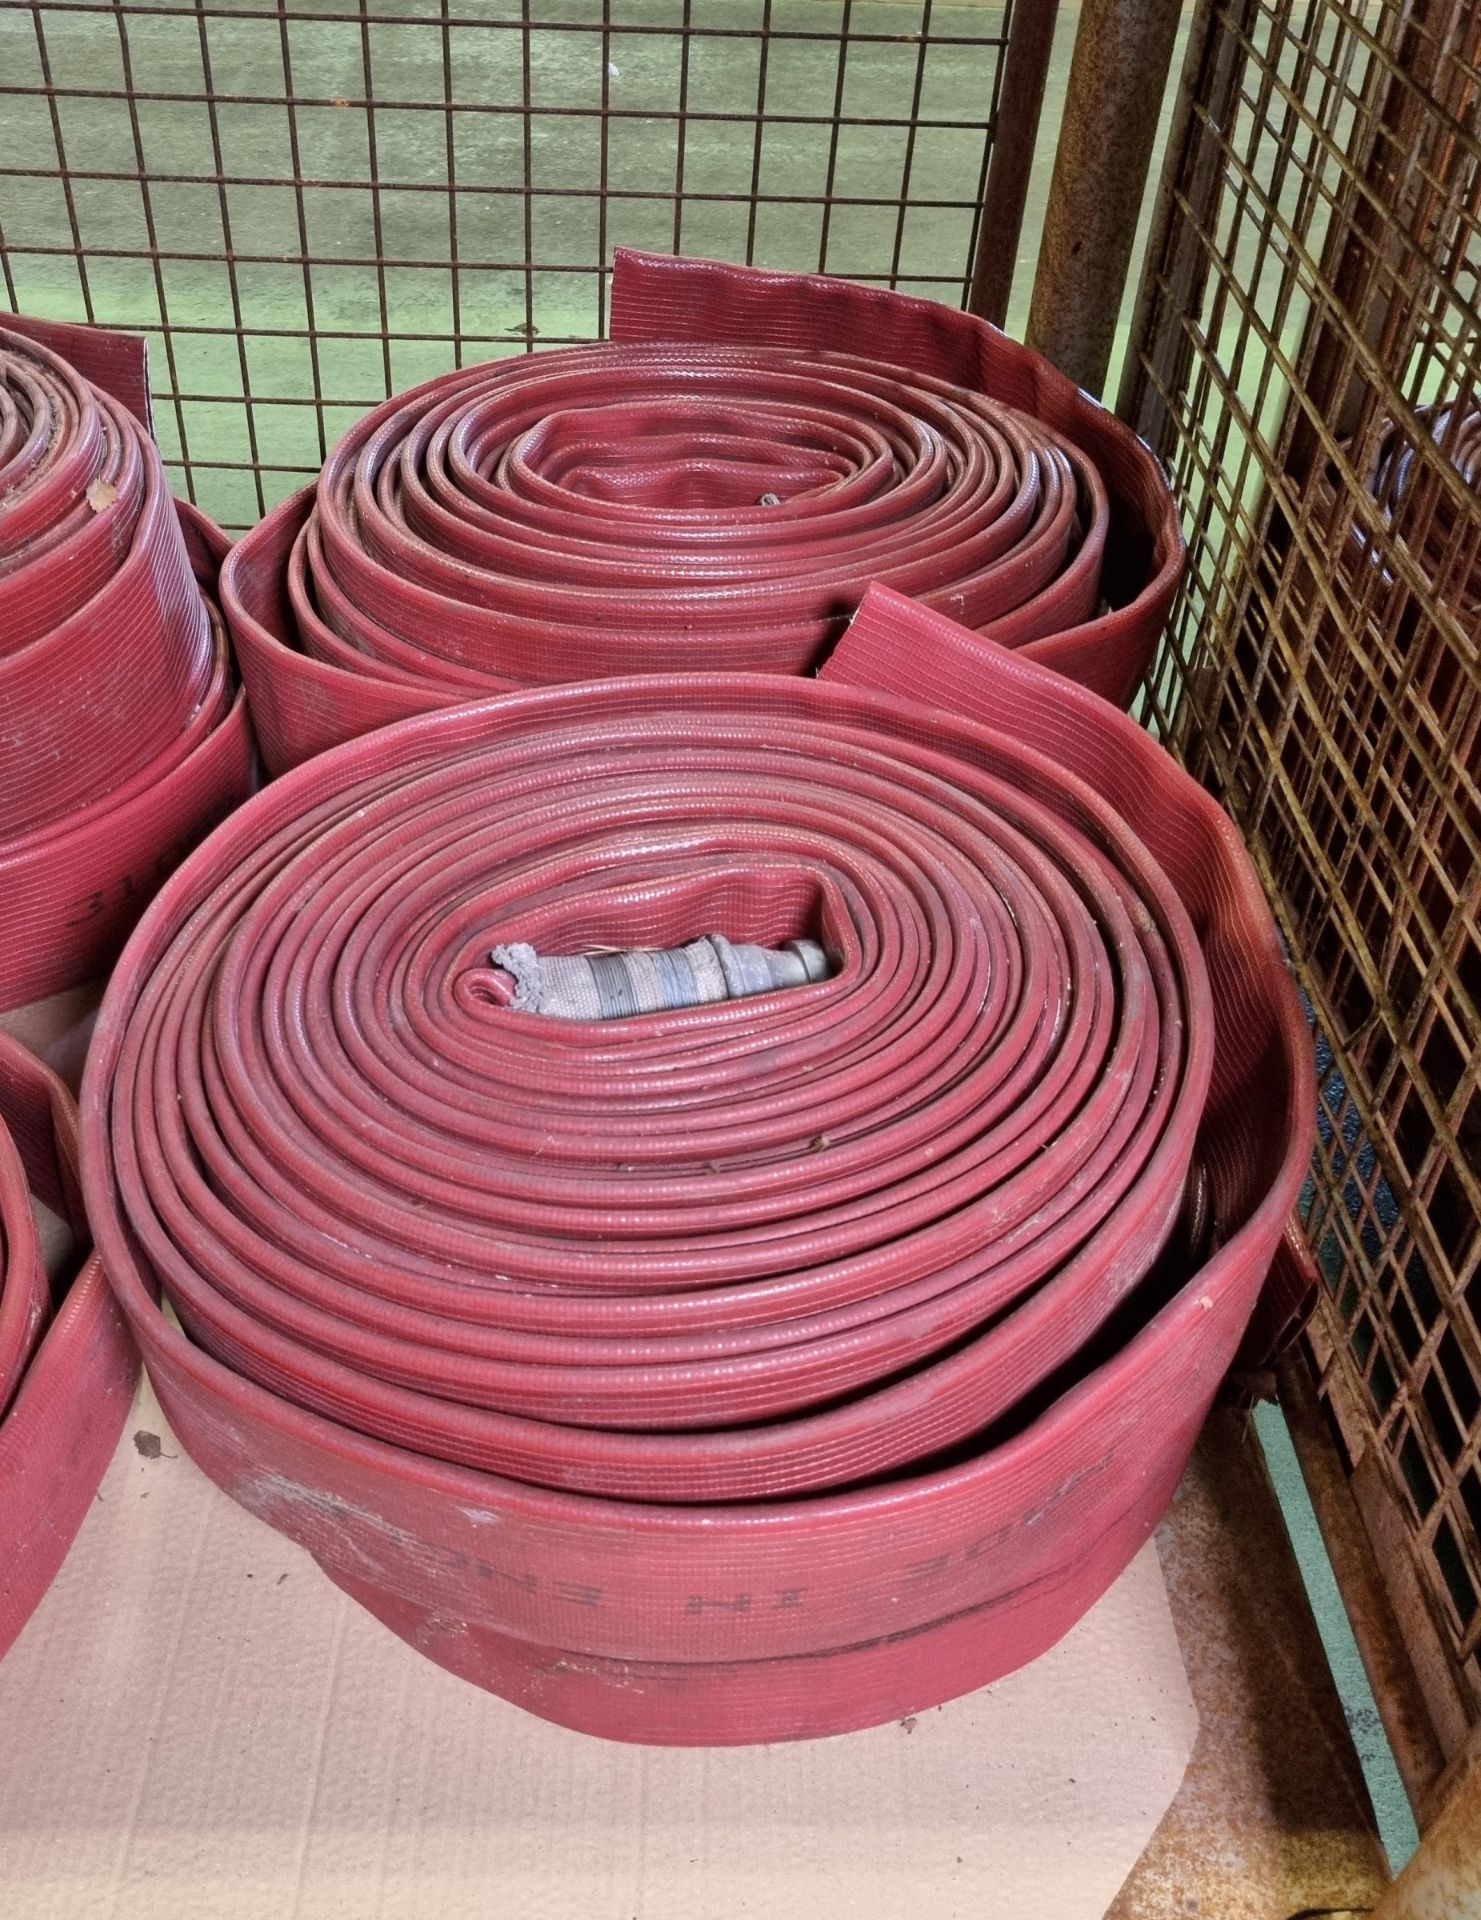 8x Angus Duraline 70mm lay flat hoses with single coupling - approx 20m in length - Image 3 of 4